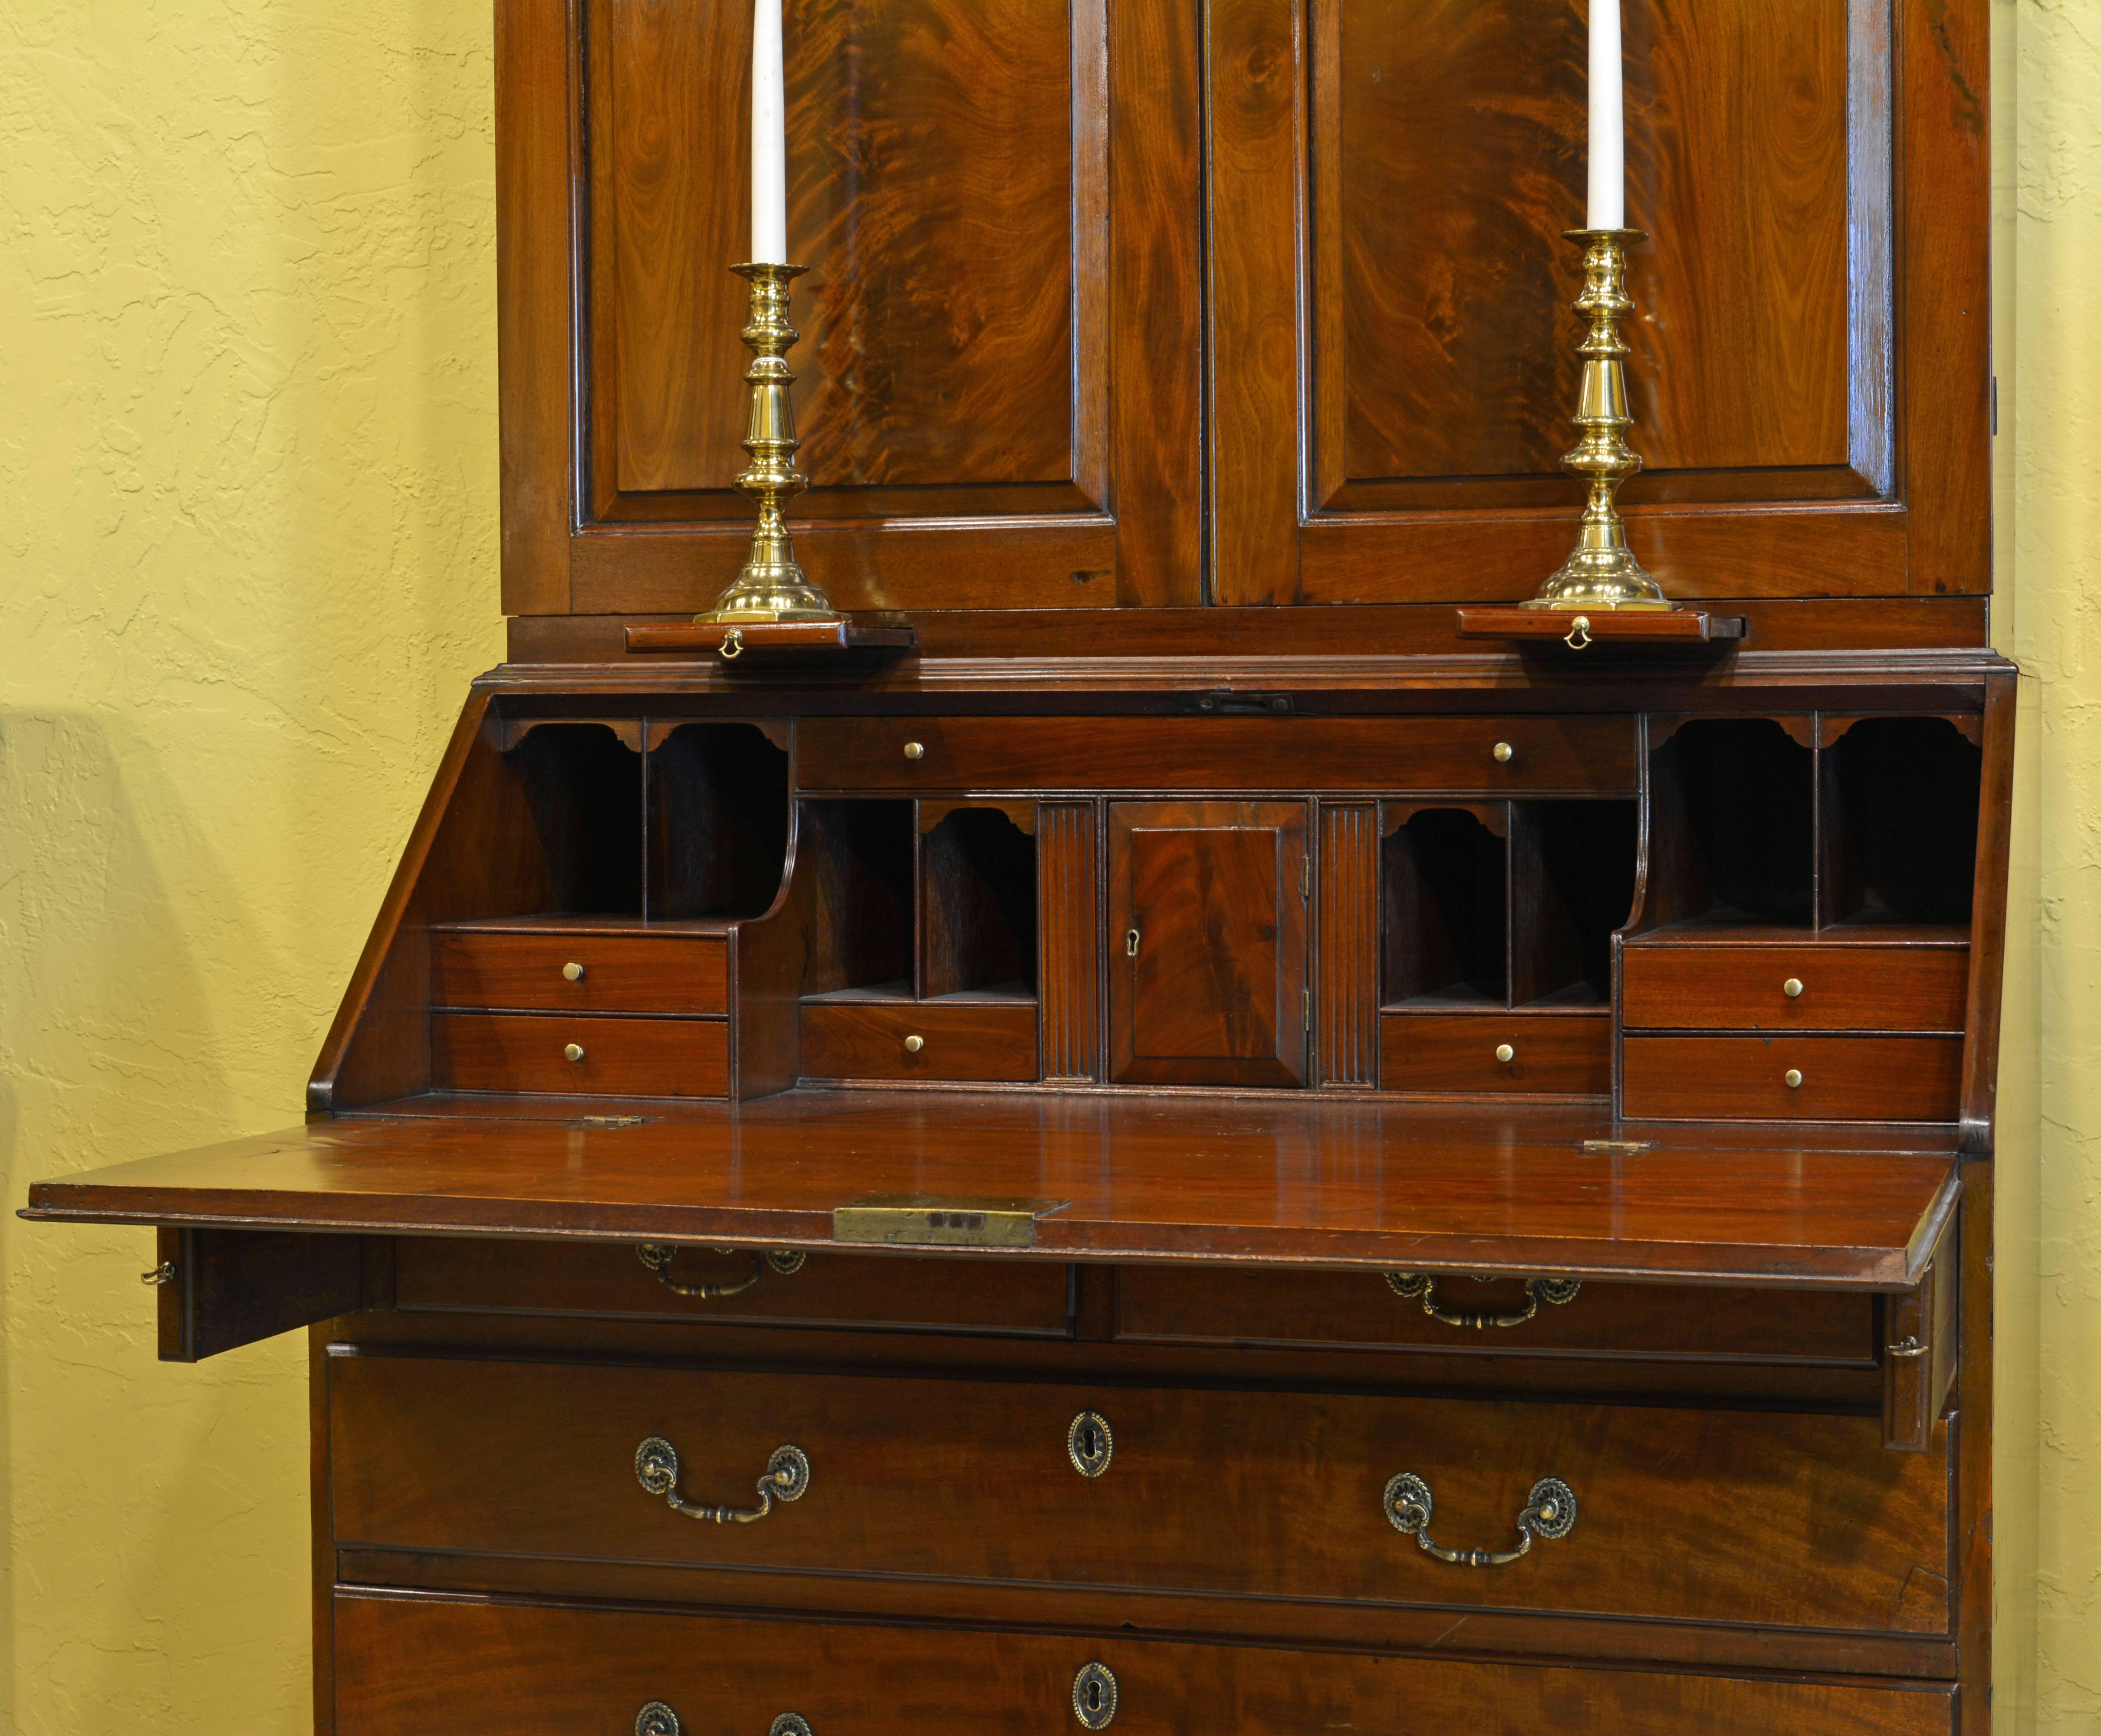 Of classical proportions and with the warm glow of the flamed mahogany this secretary bookcase consists of two parts. The upper part features a dentil molded cornice above two paneled doors, enclosing a shelved interior under which you find two